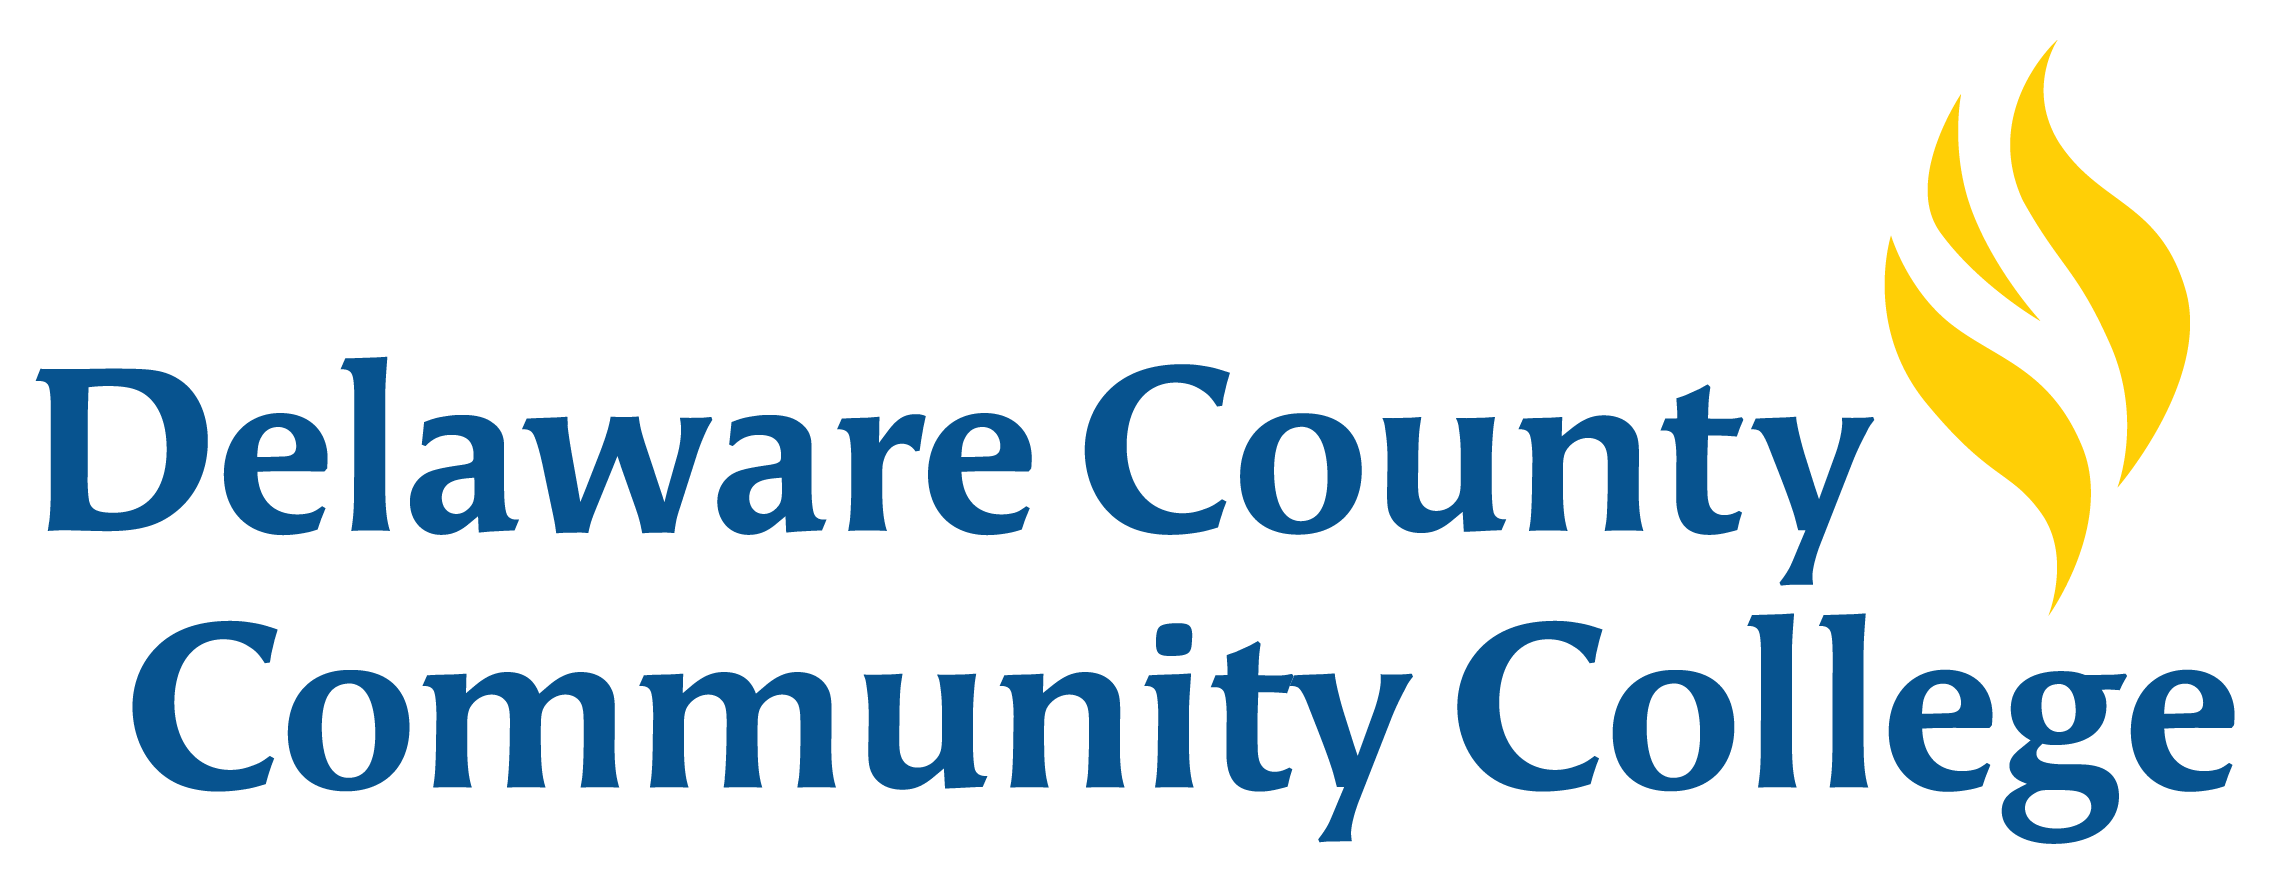 Associate Degree in Computer programming | Associate's degree | Computer Science & IT | Blended Learning | 2 years | Delaware County Community College (DCCC) | USA